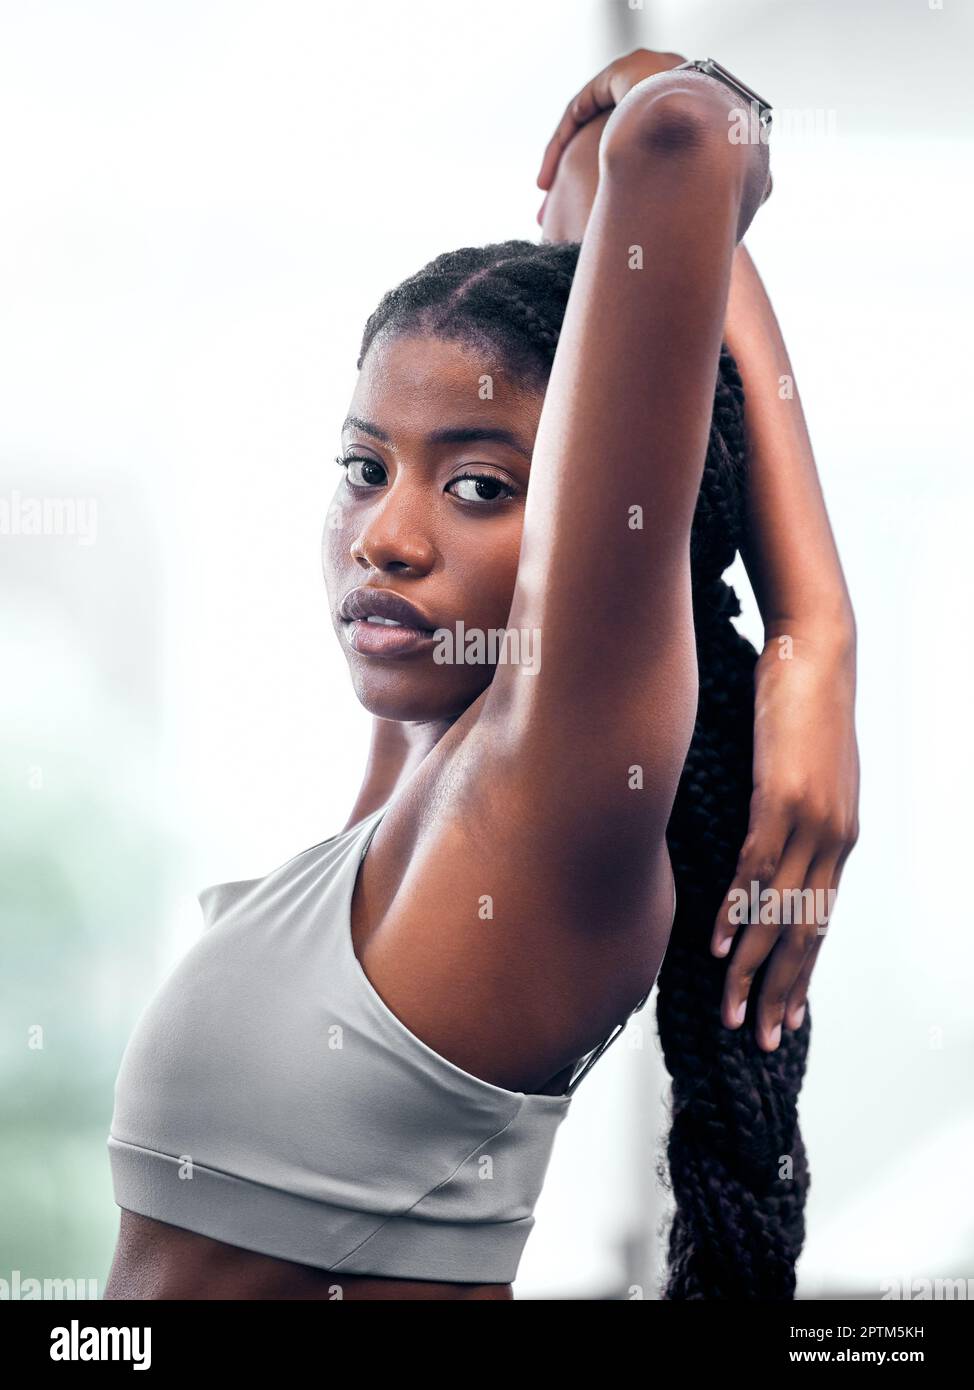 Premium Photo  African american athlete woman workout out arms on